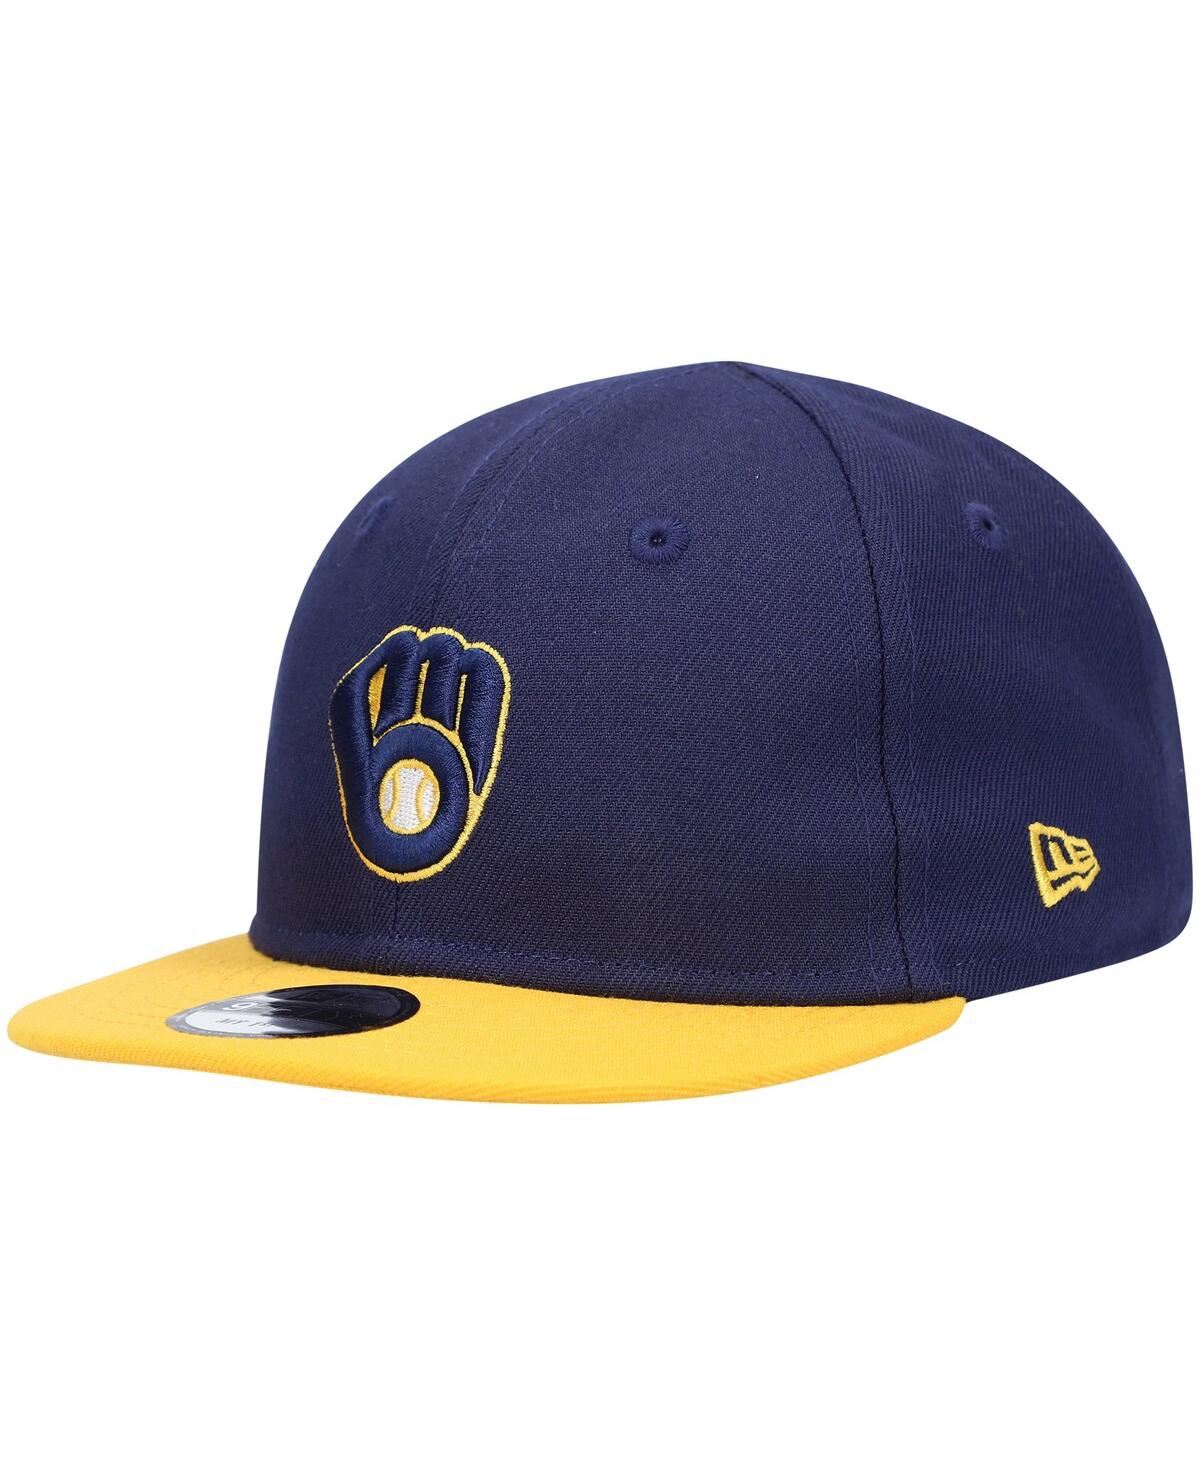 New Era Babies' Infant Unisex Navy Milwaukee Brewers My First 9fifty Hat